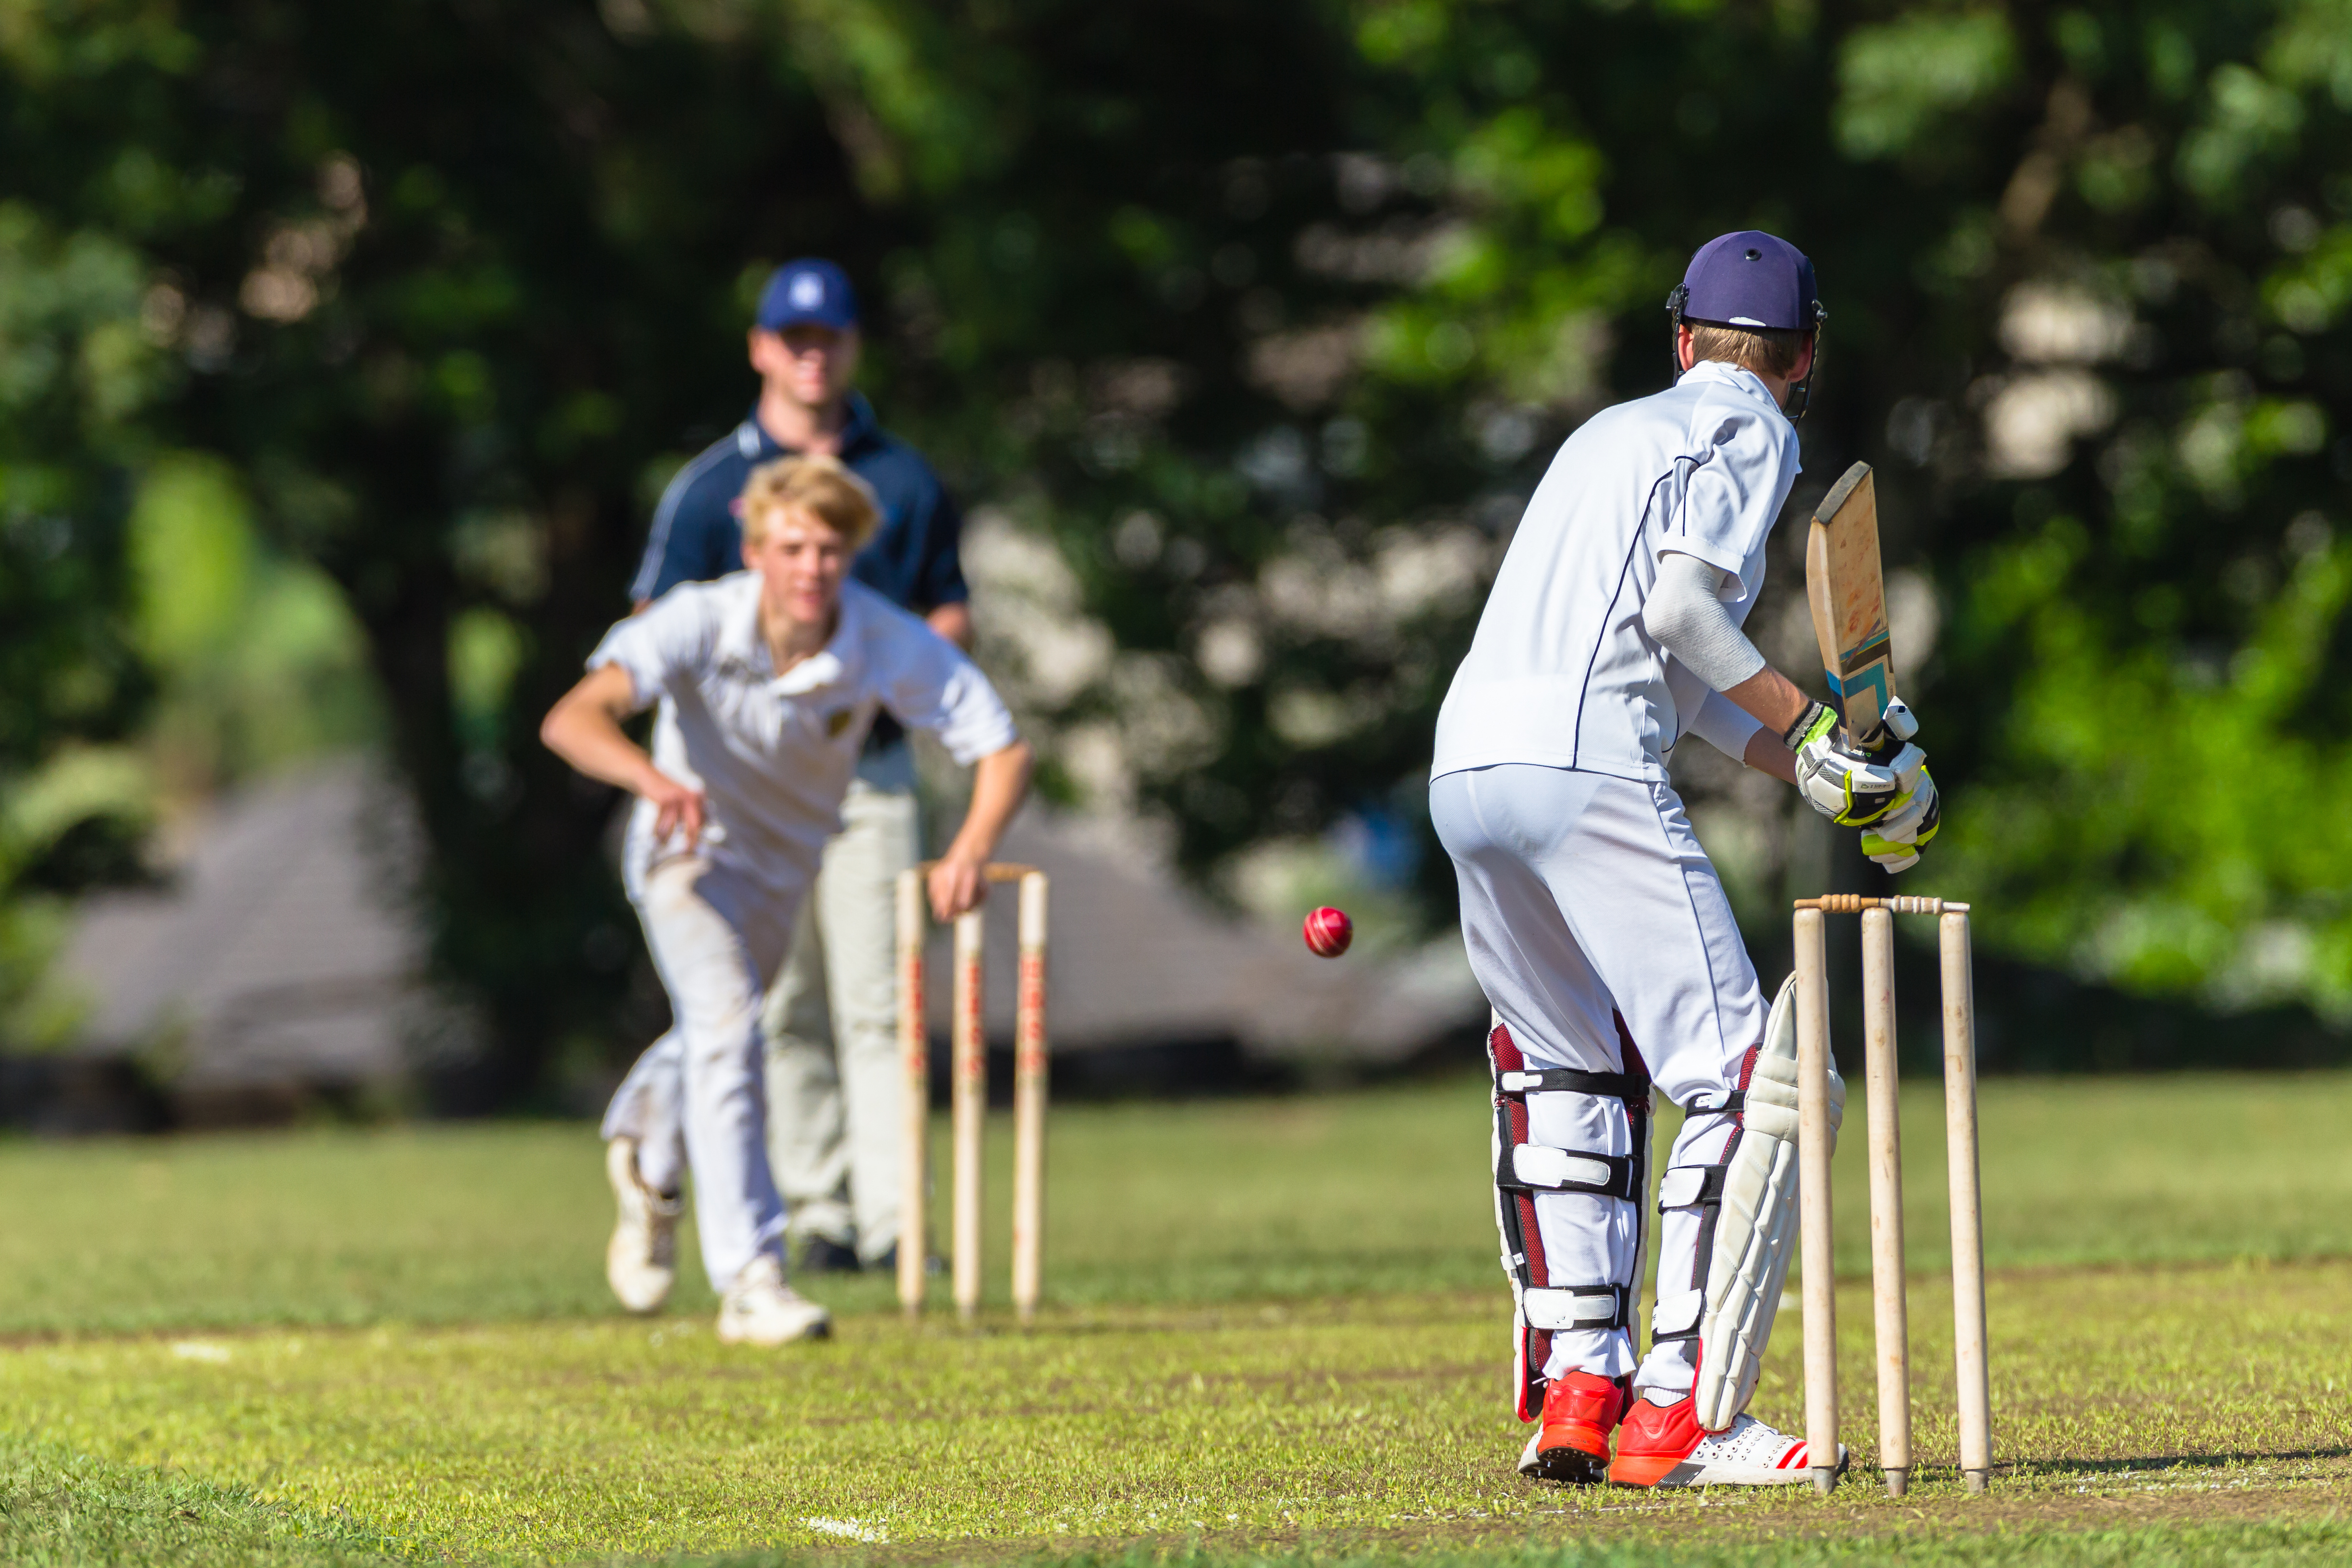 Cricket Coaching and Umpiring for Inexperienced Coaches with Richard Skyrme